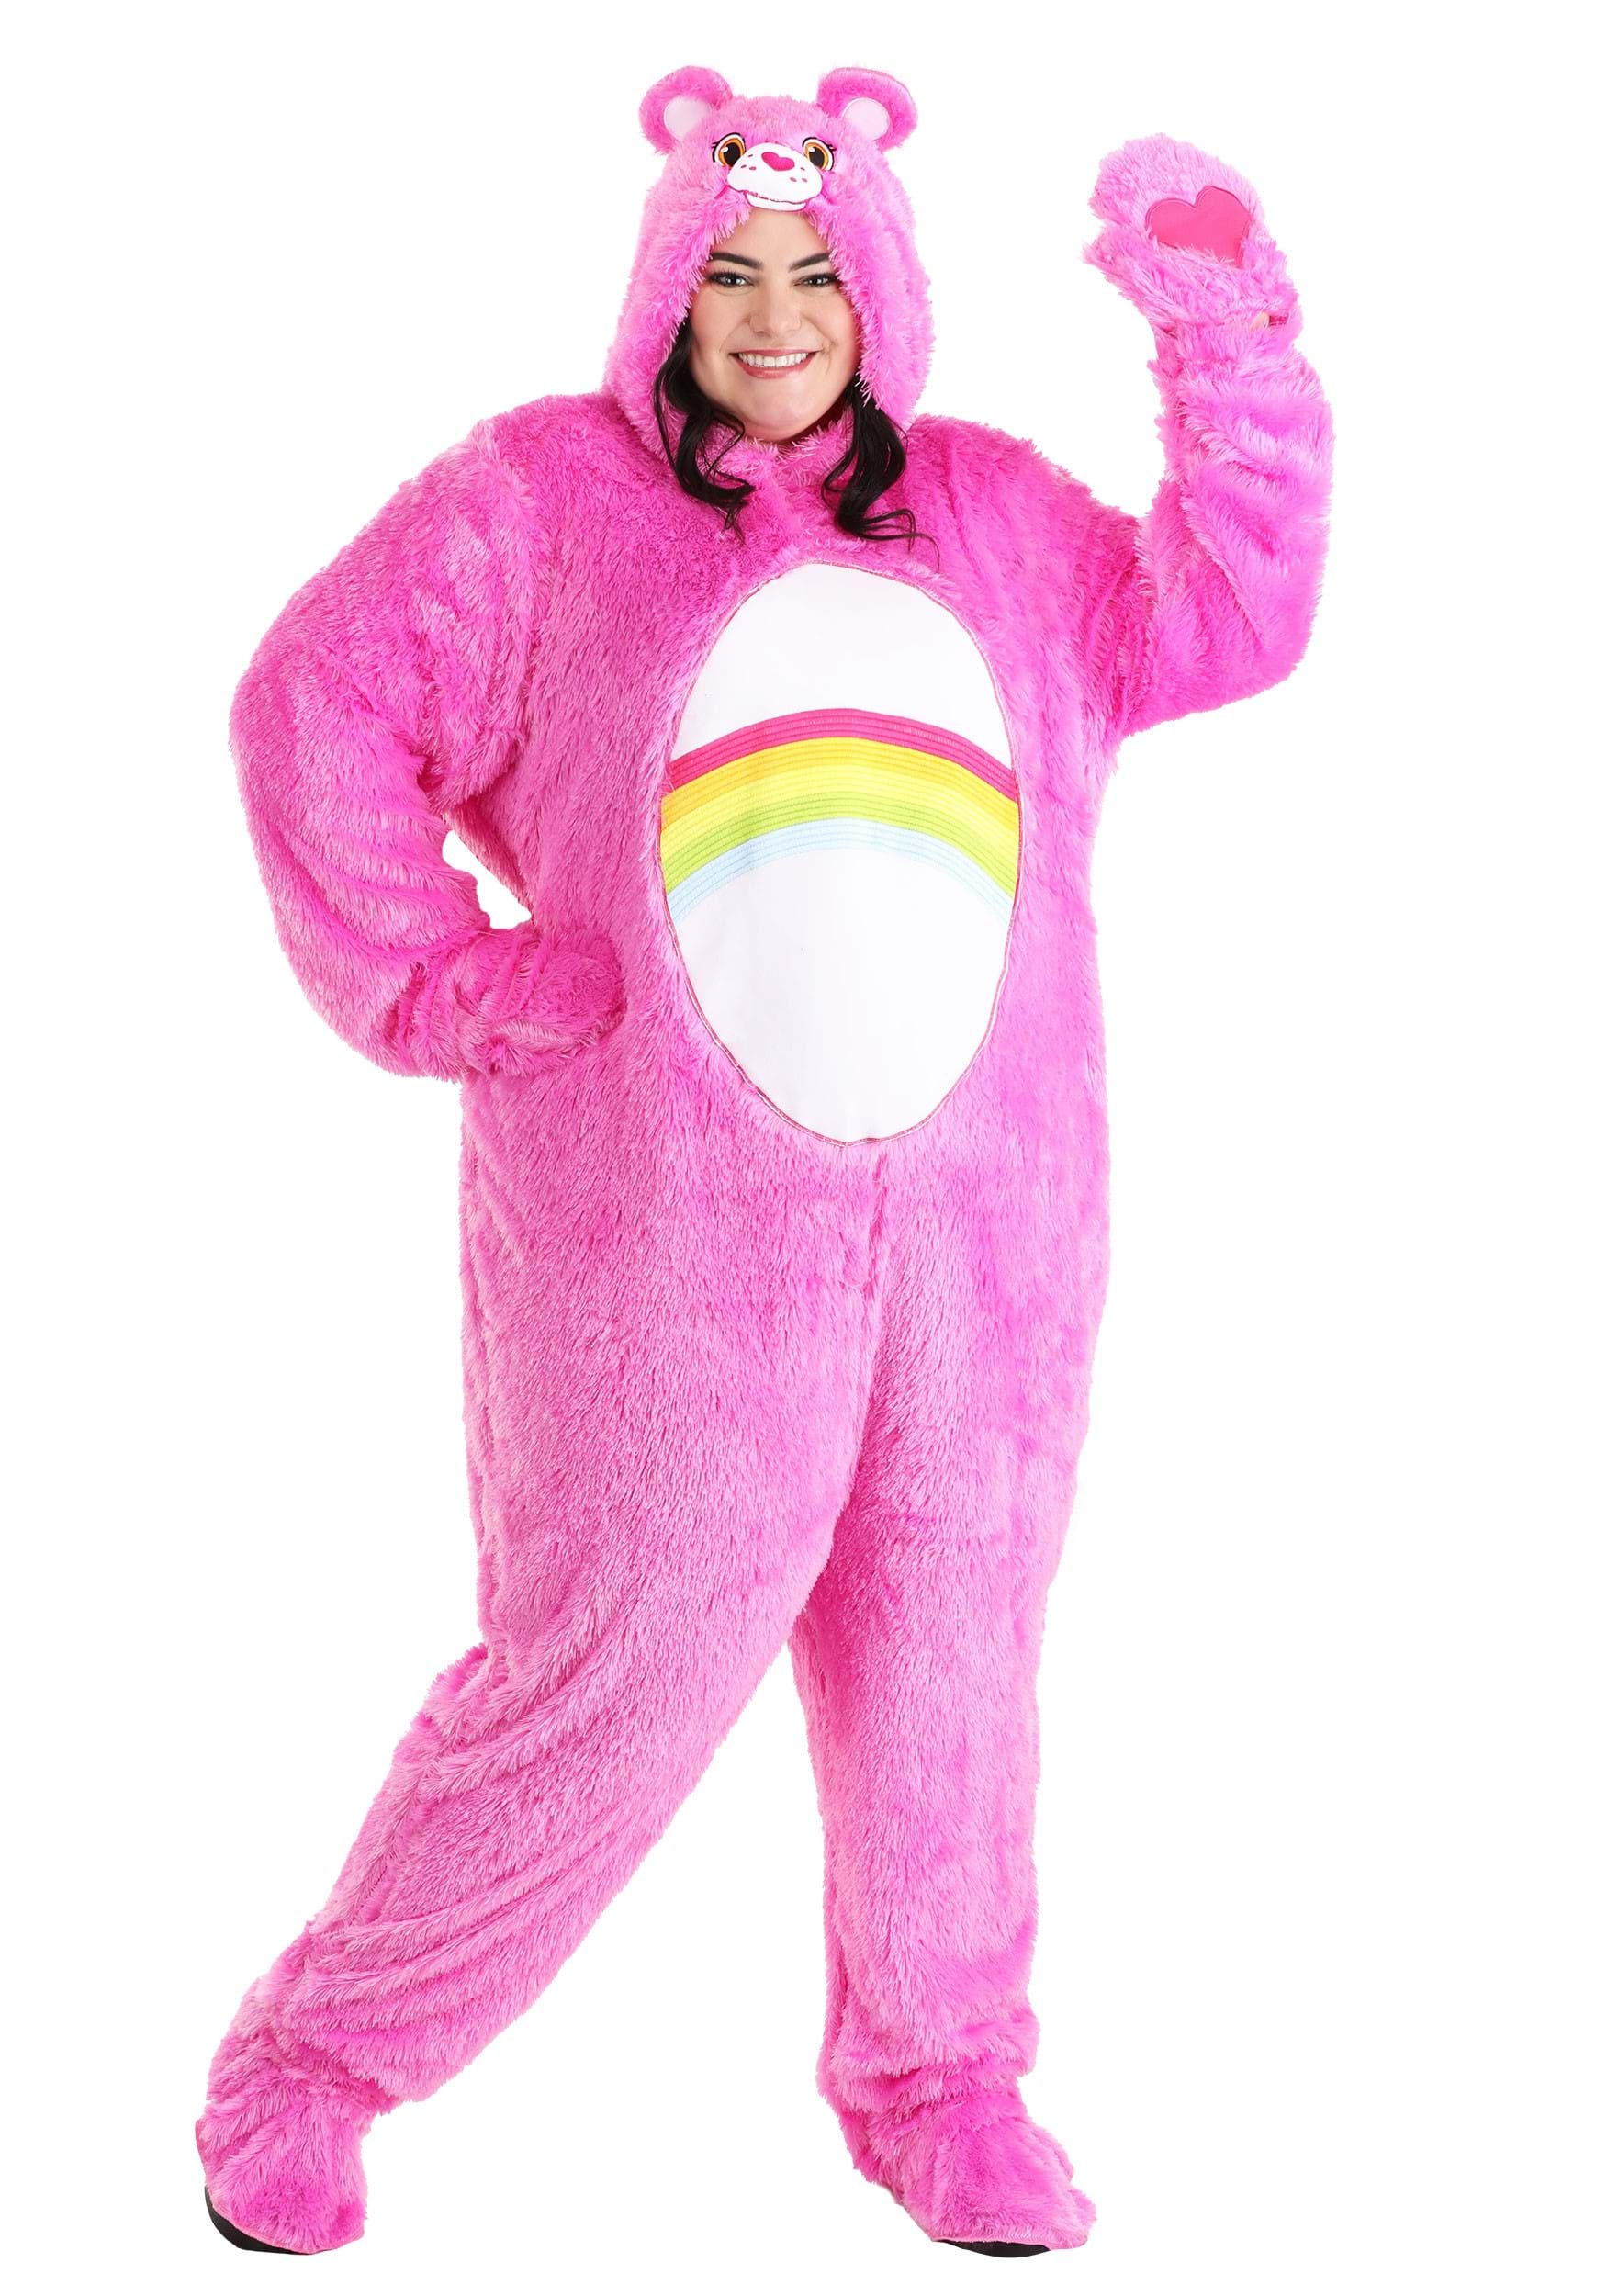 Photos - Fancy Dress CARE FUN Costumes Adult  Bears Classic Cheer Bear Plus Size Costume Pink 